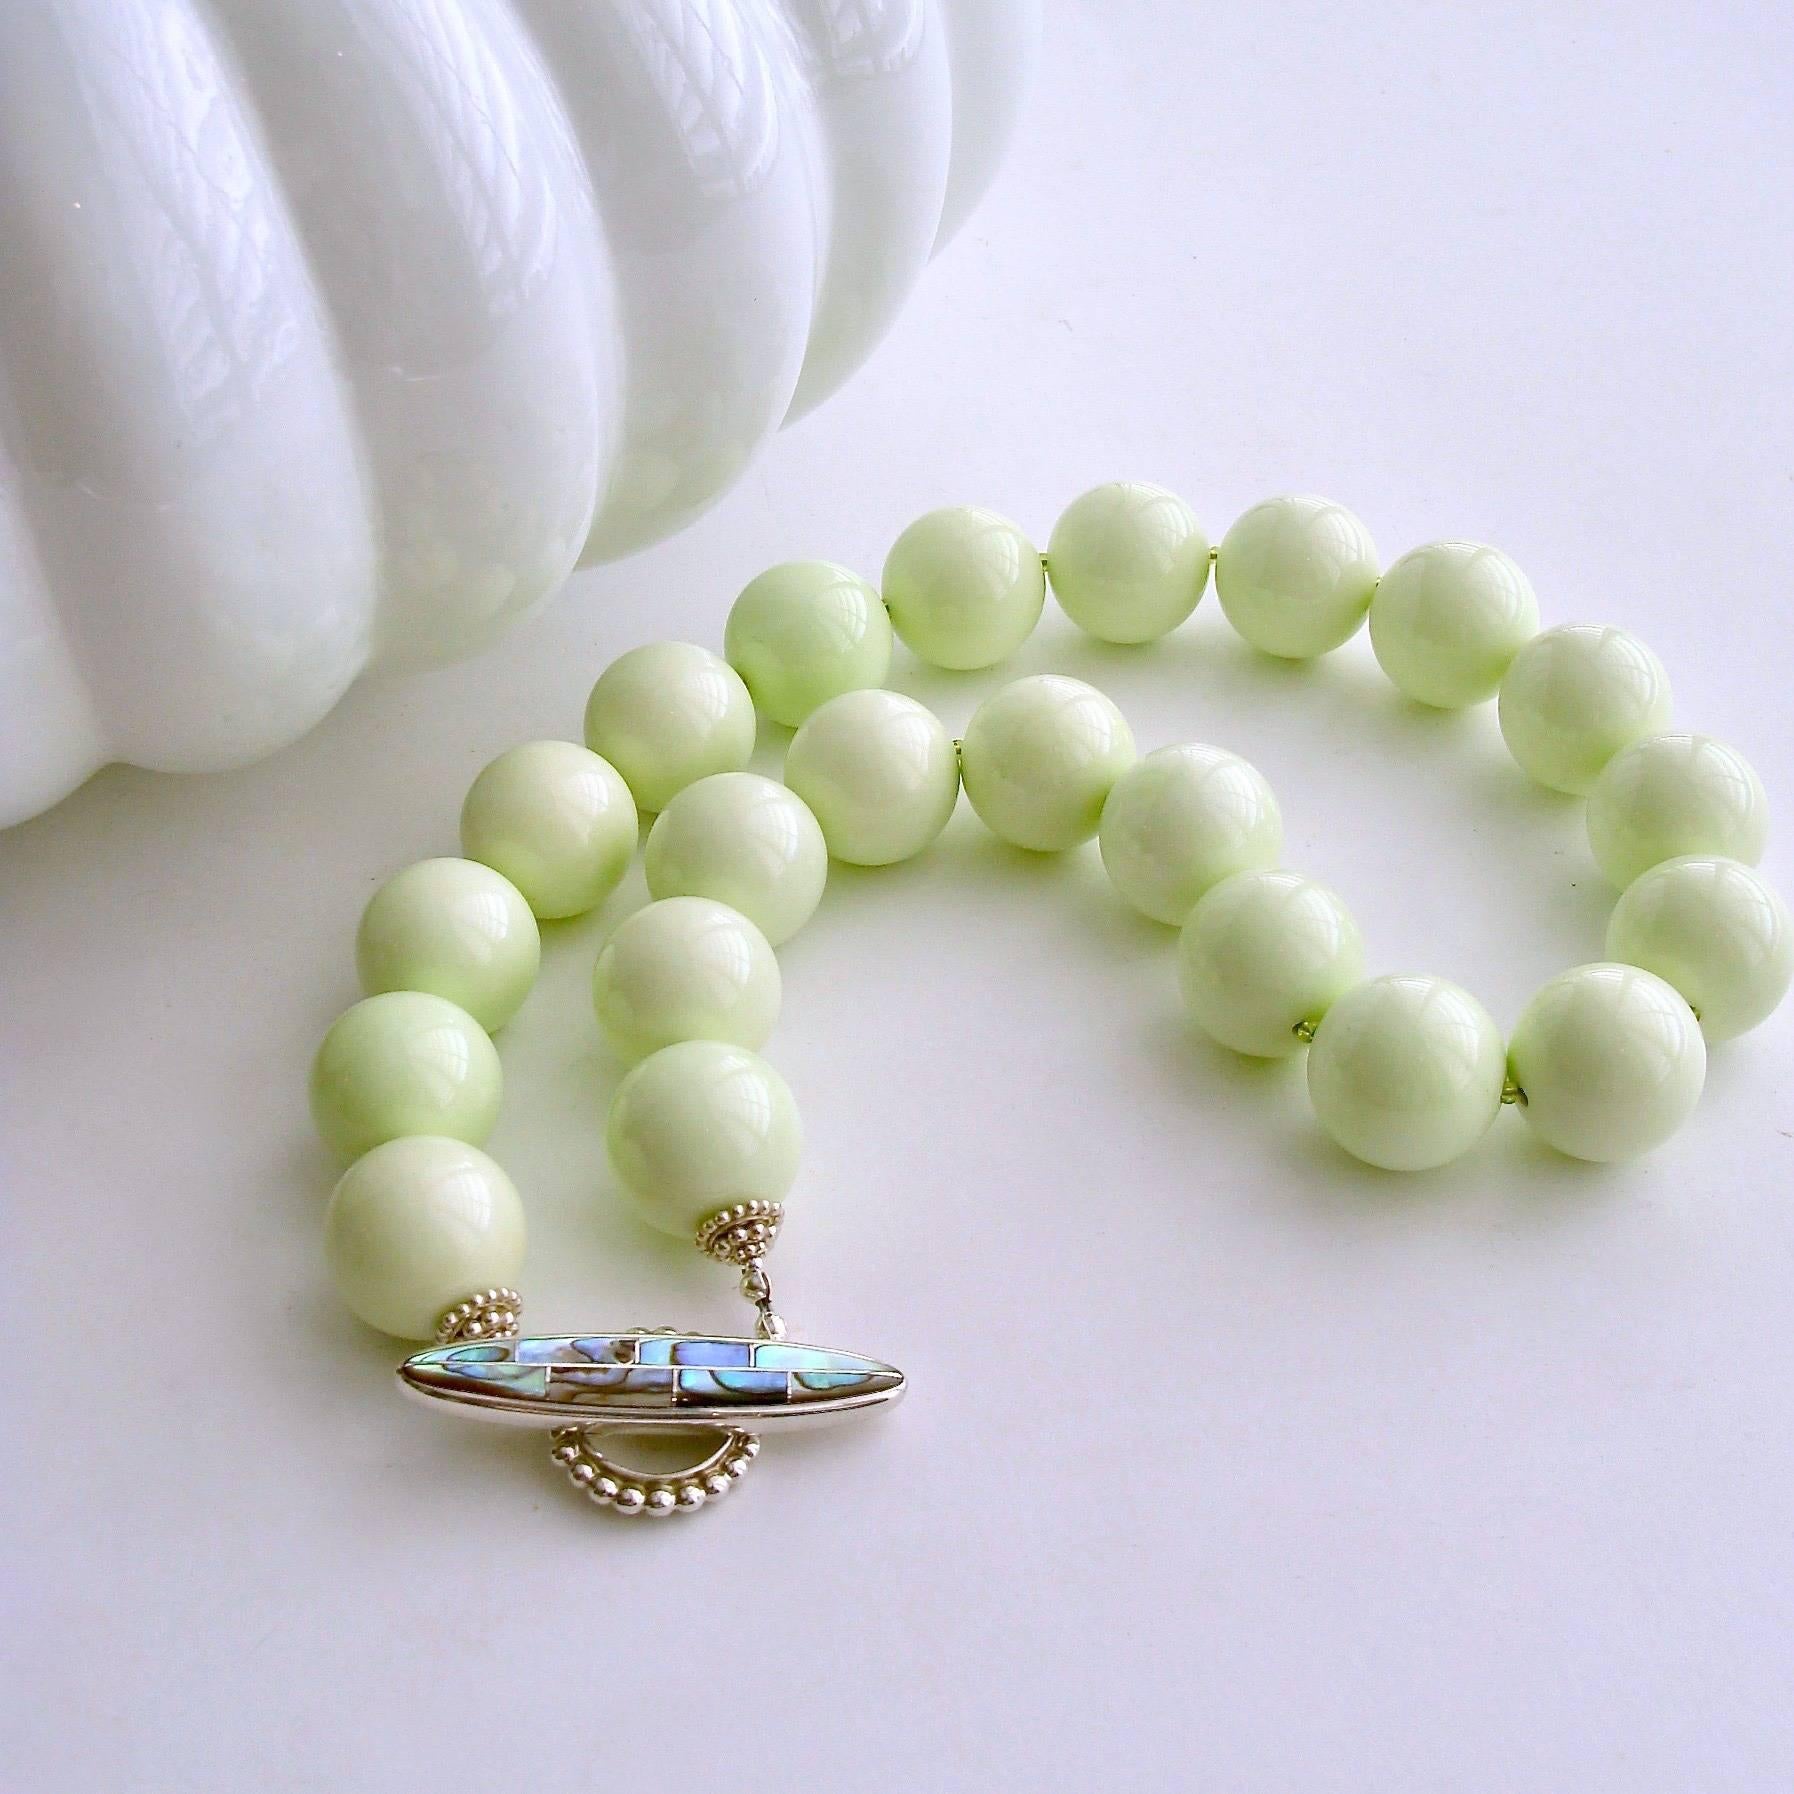 With a pastel revolution on the horizon this Spring, this gorgeous honeydew-colored choker necklace will certainly be on your shopping list.  Luxe 18 mm lemon magnesite beads are designed to sit nestled on the collarbone to accentuate the pastel